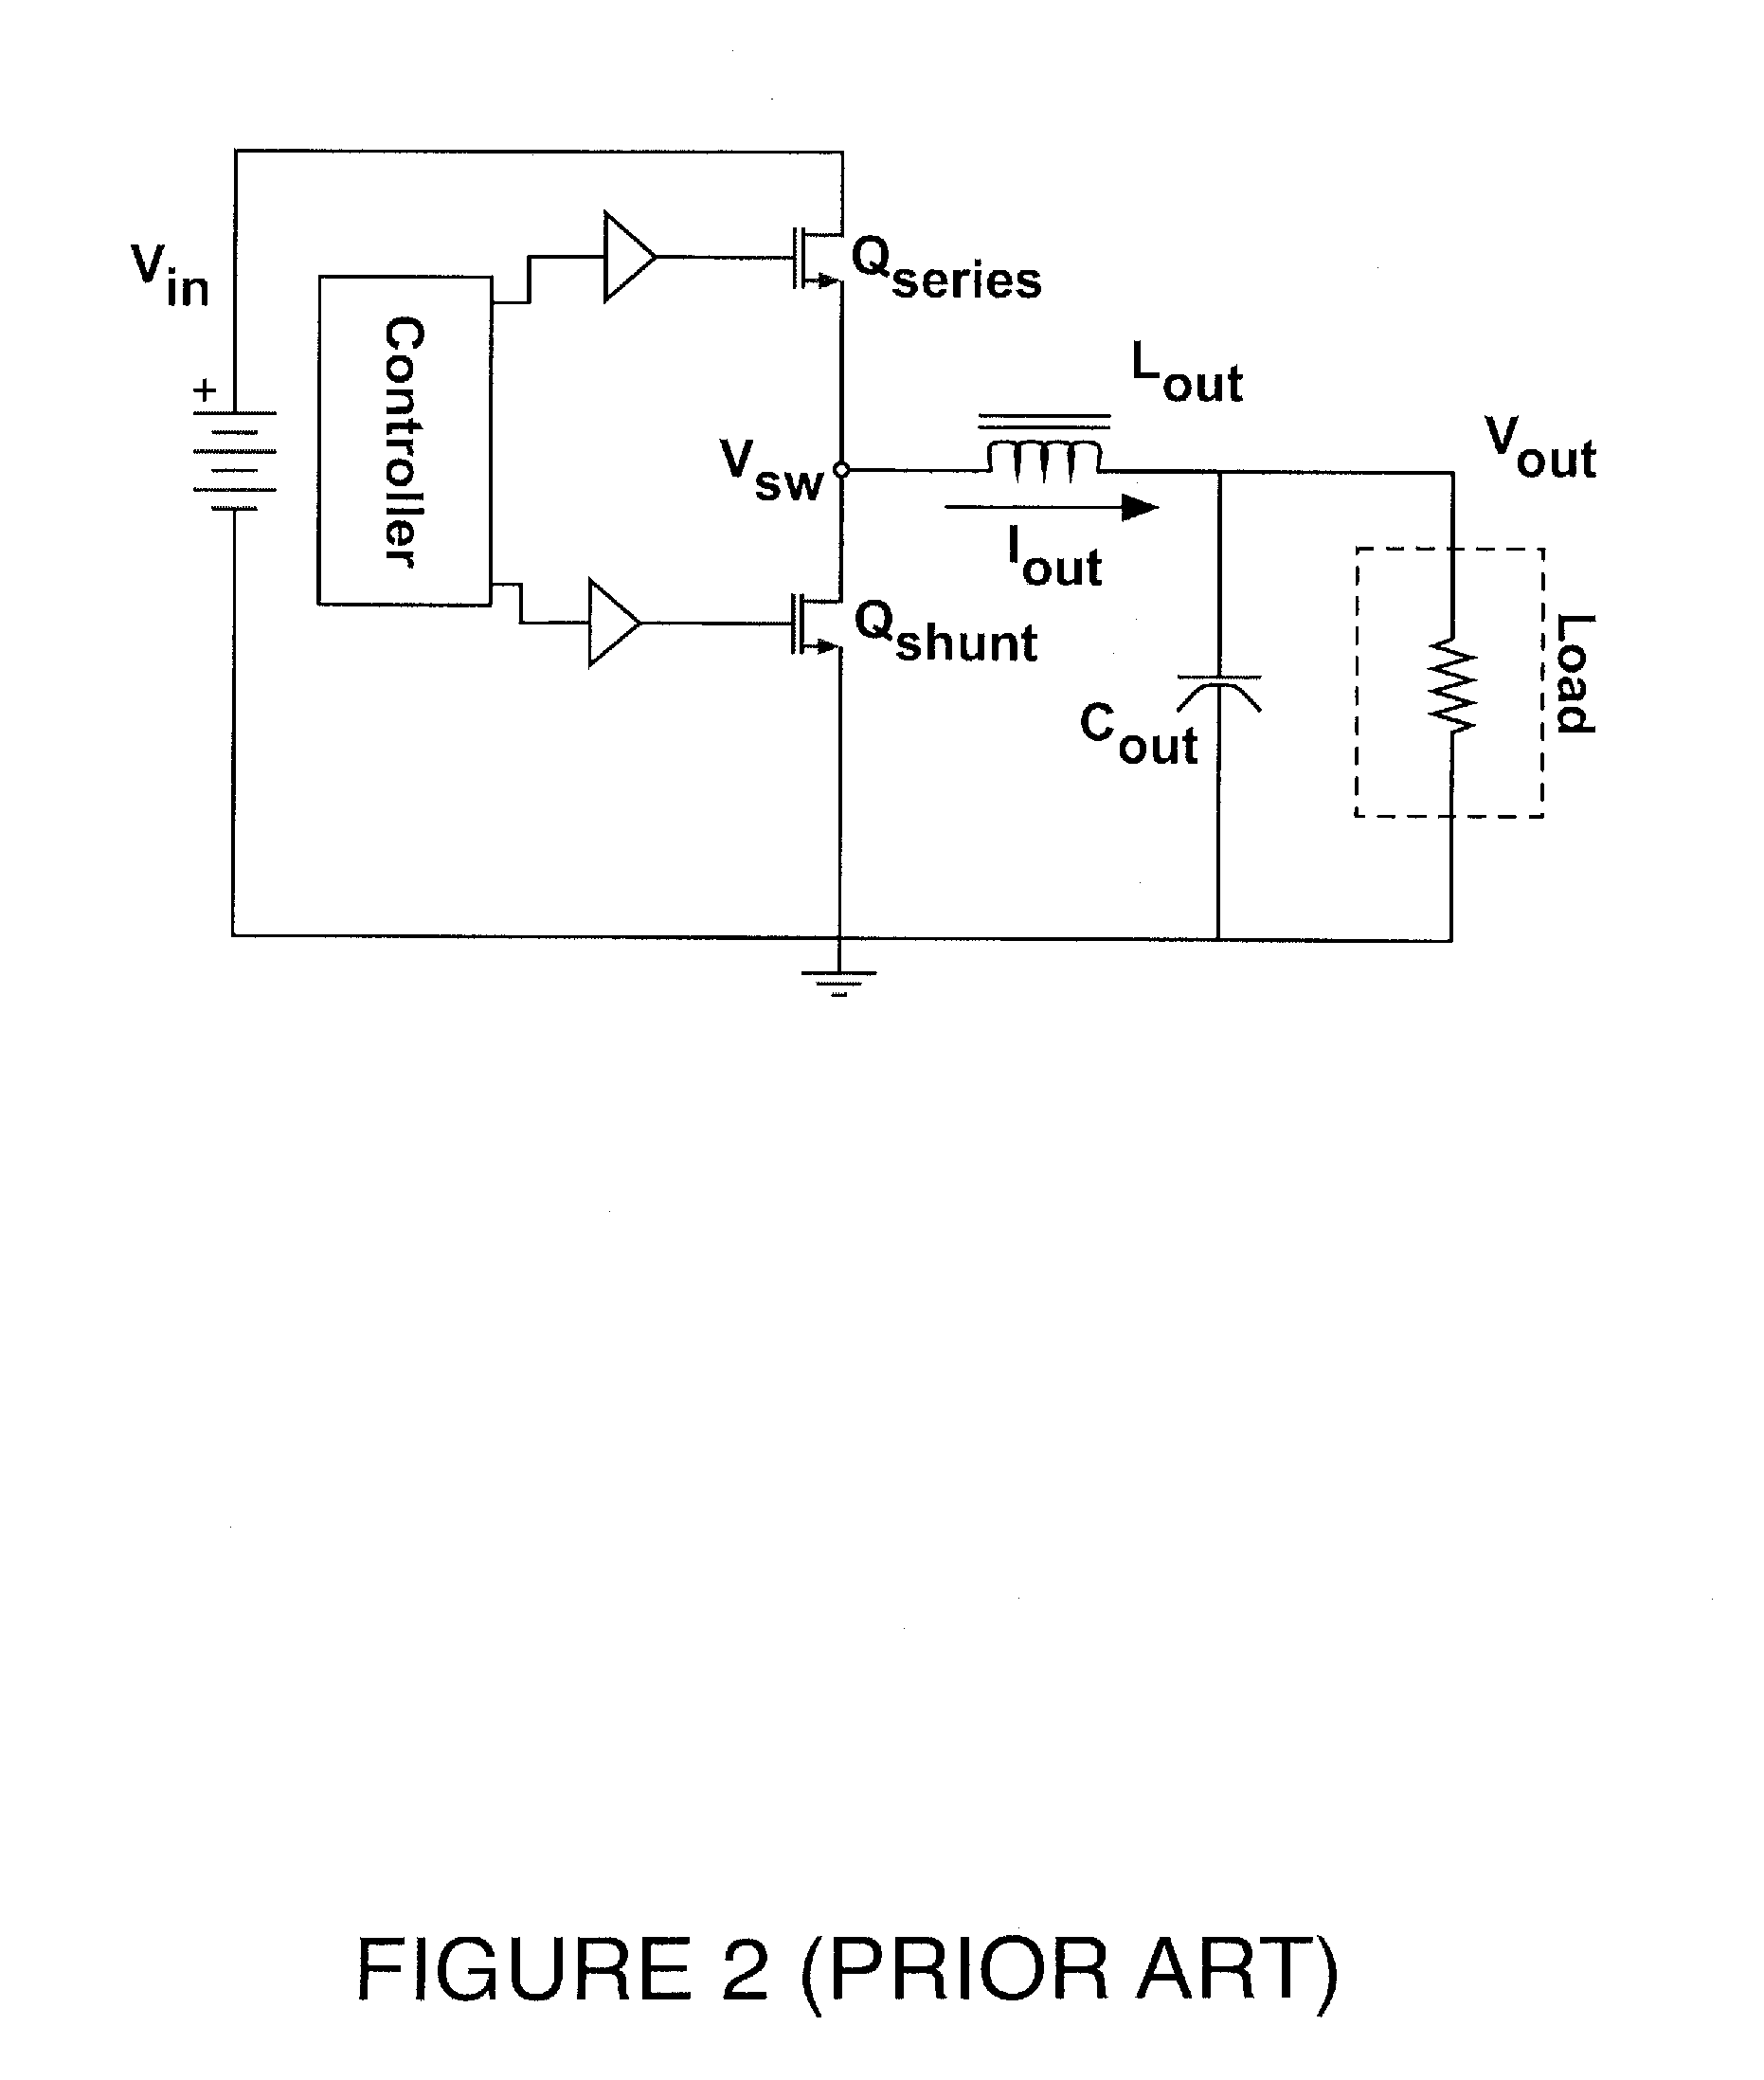 Over Voltage Protection of a Switching Converter